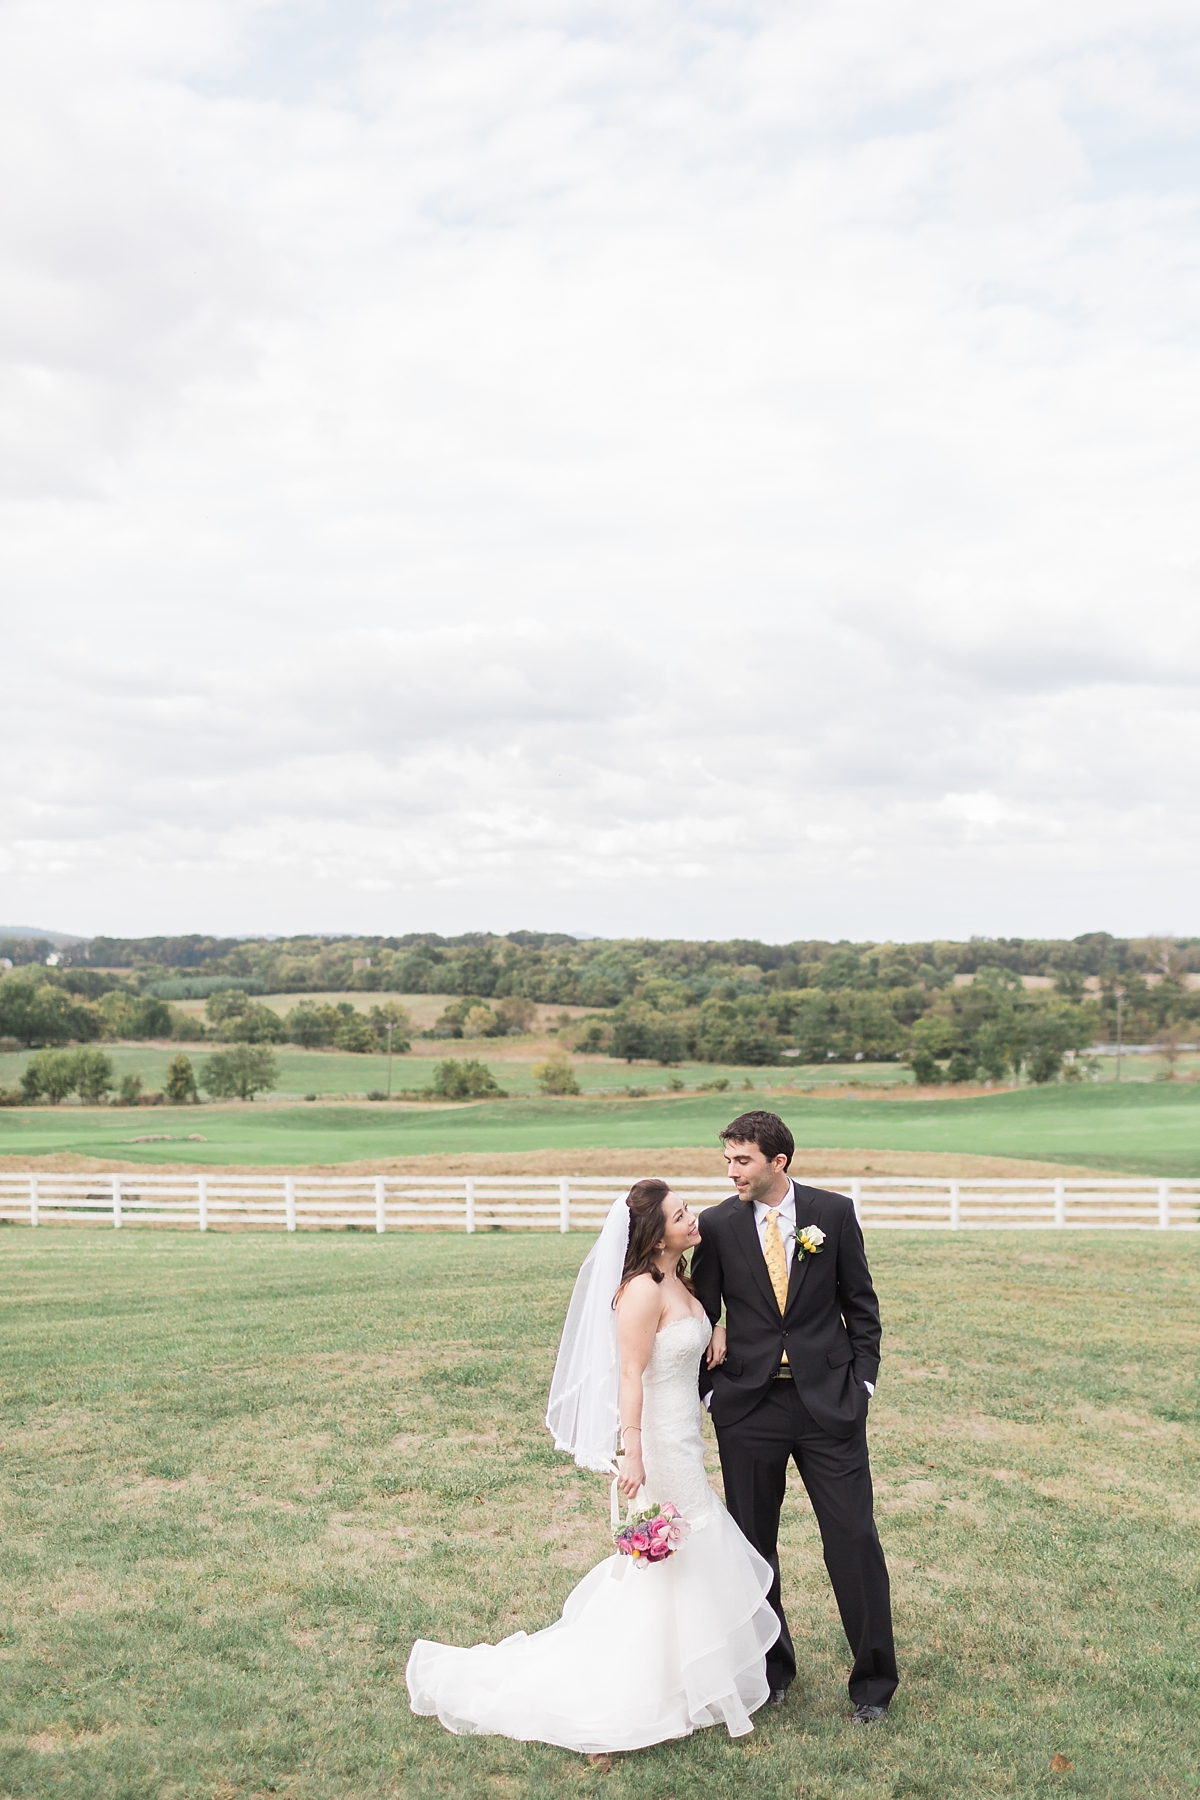 A romantic wedding at Raspberry Plain in Leesburg, VA with unique details including an altar made out of 1000 colorful paper cranes. 